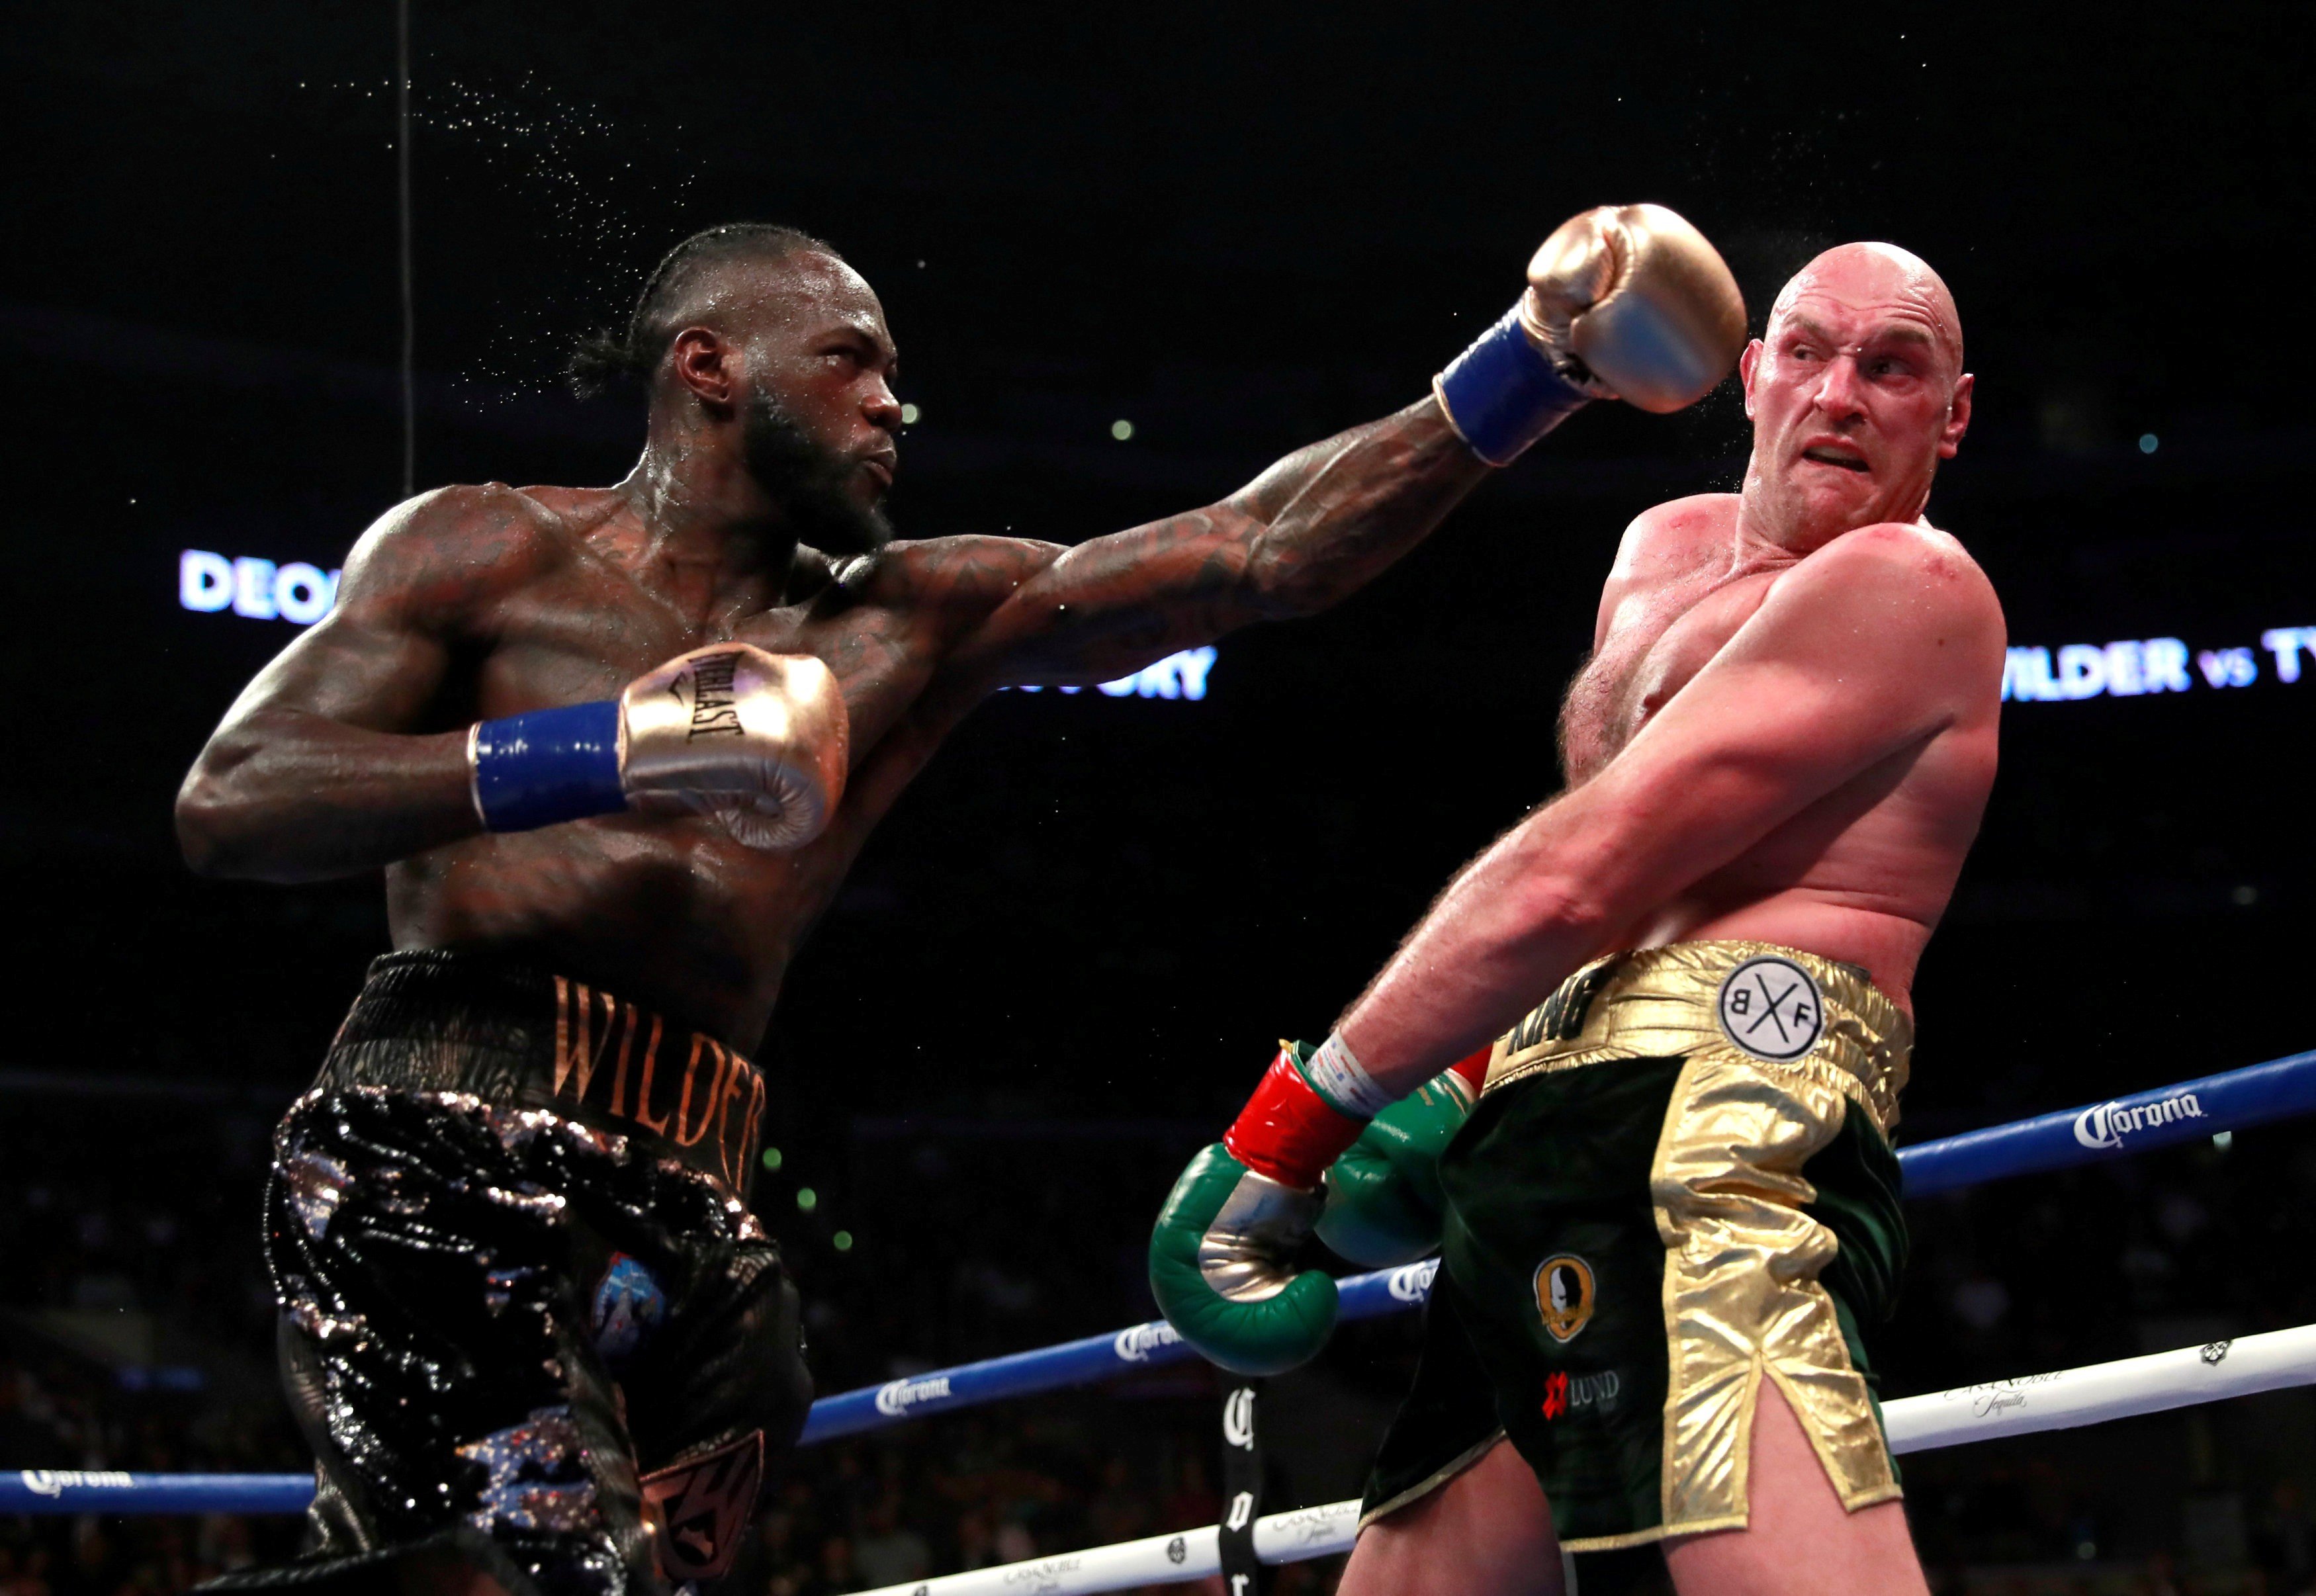 Deontay Wilder in action against Tyson Fury in their first WBC heavyweight title fight in Los Angeles in 2018. Photo: Reuters